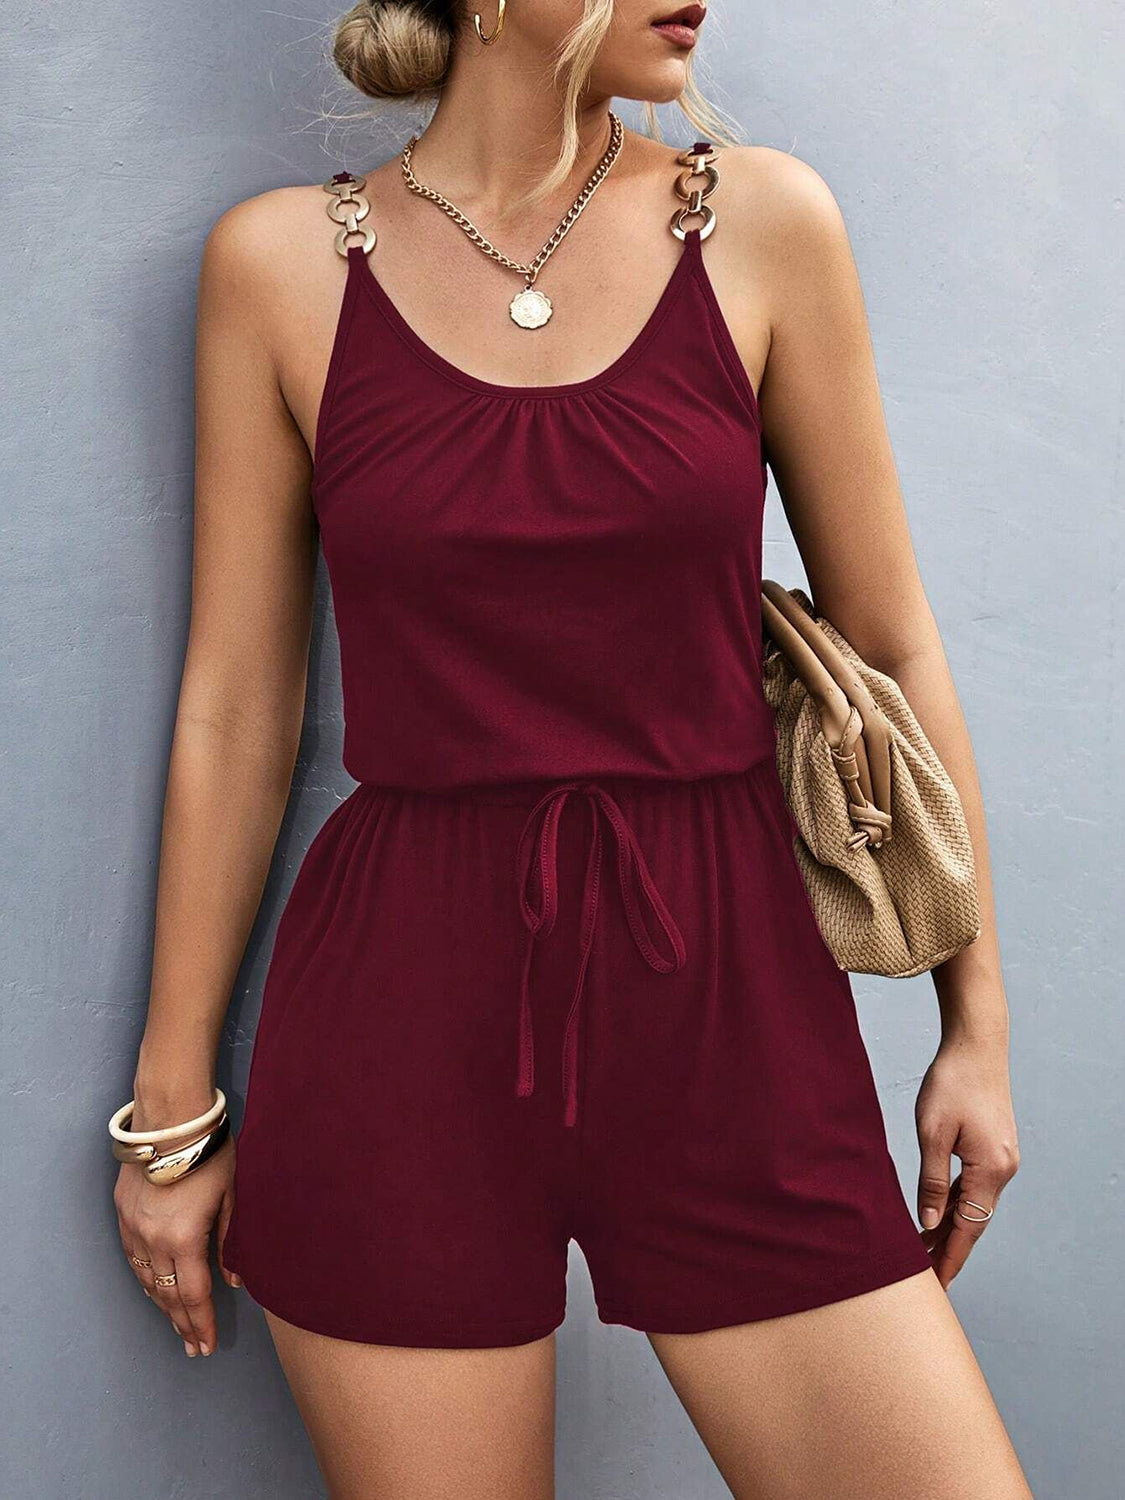 Pocketed Buckle Trim Scoop Neck Romper Sunset and Swim Burgundy S 